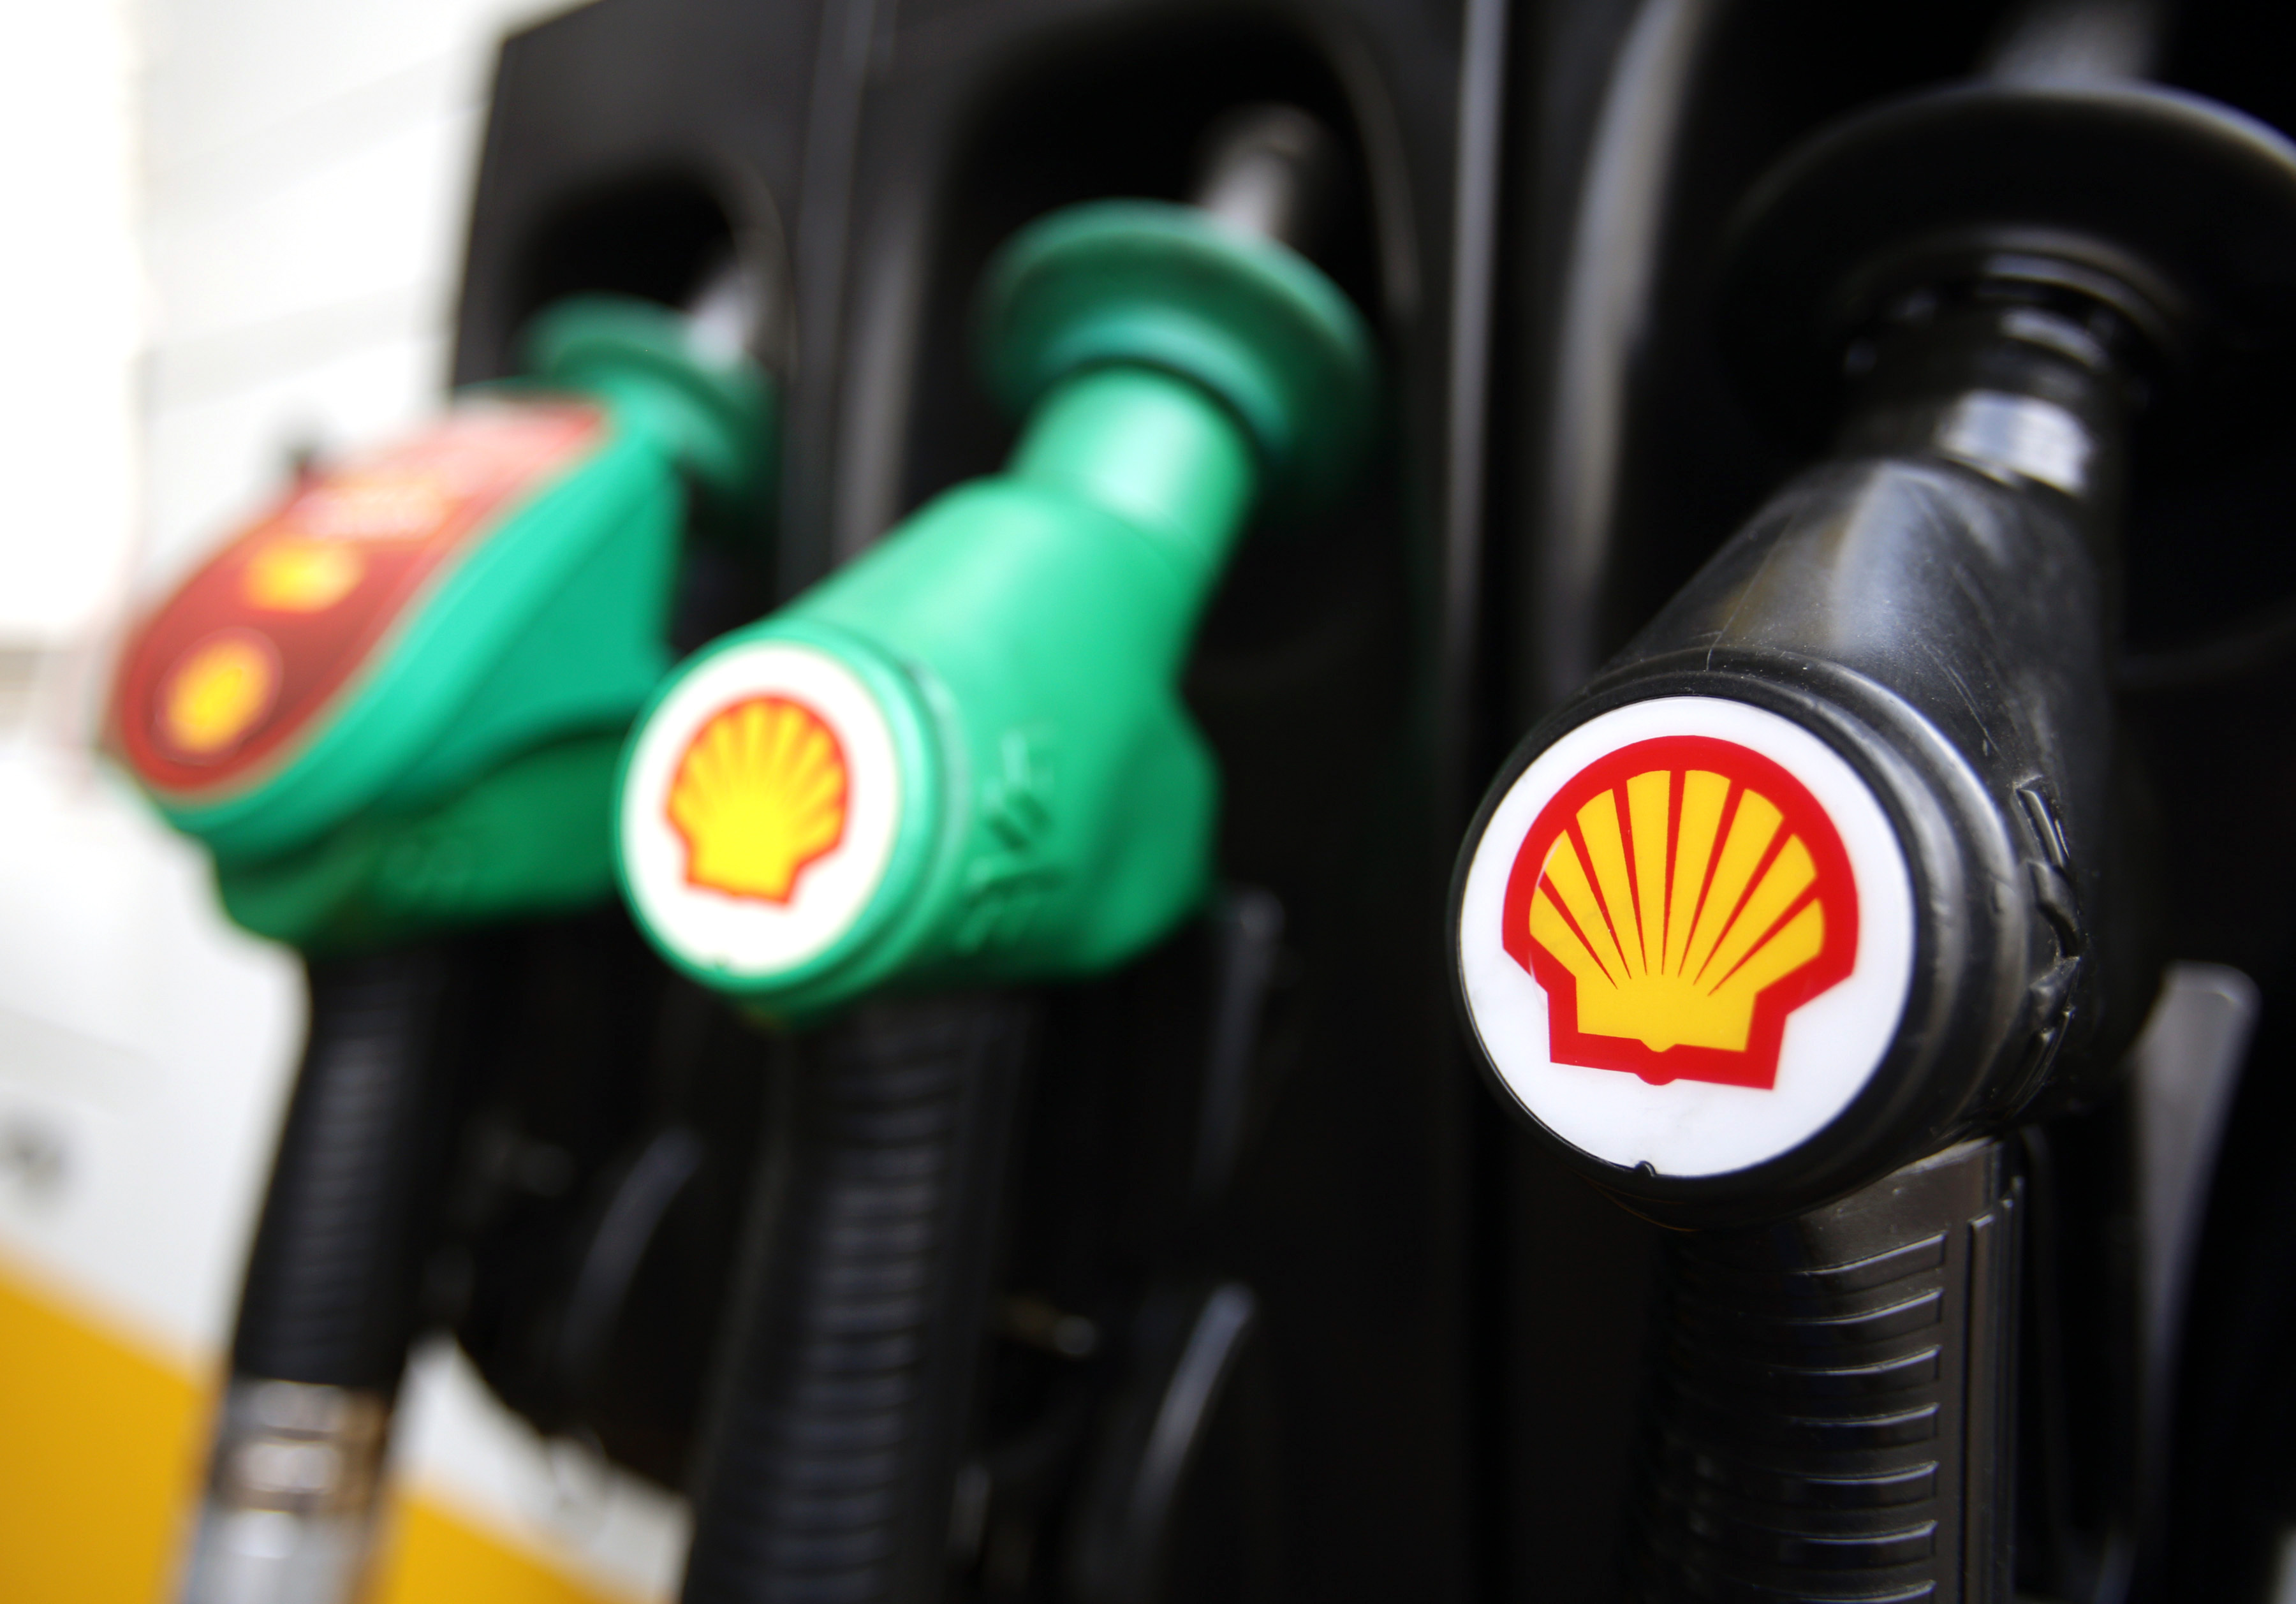 Shell has revised one of its climate pledges in order to focus on growing its huge gas business